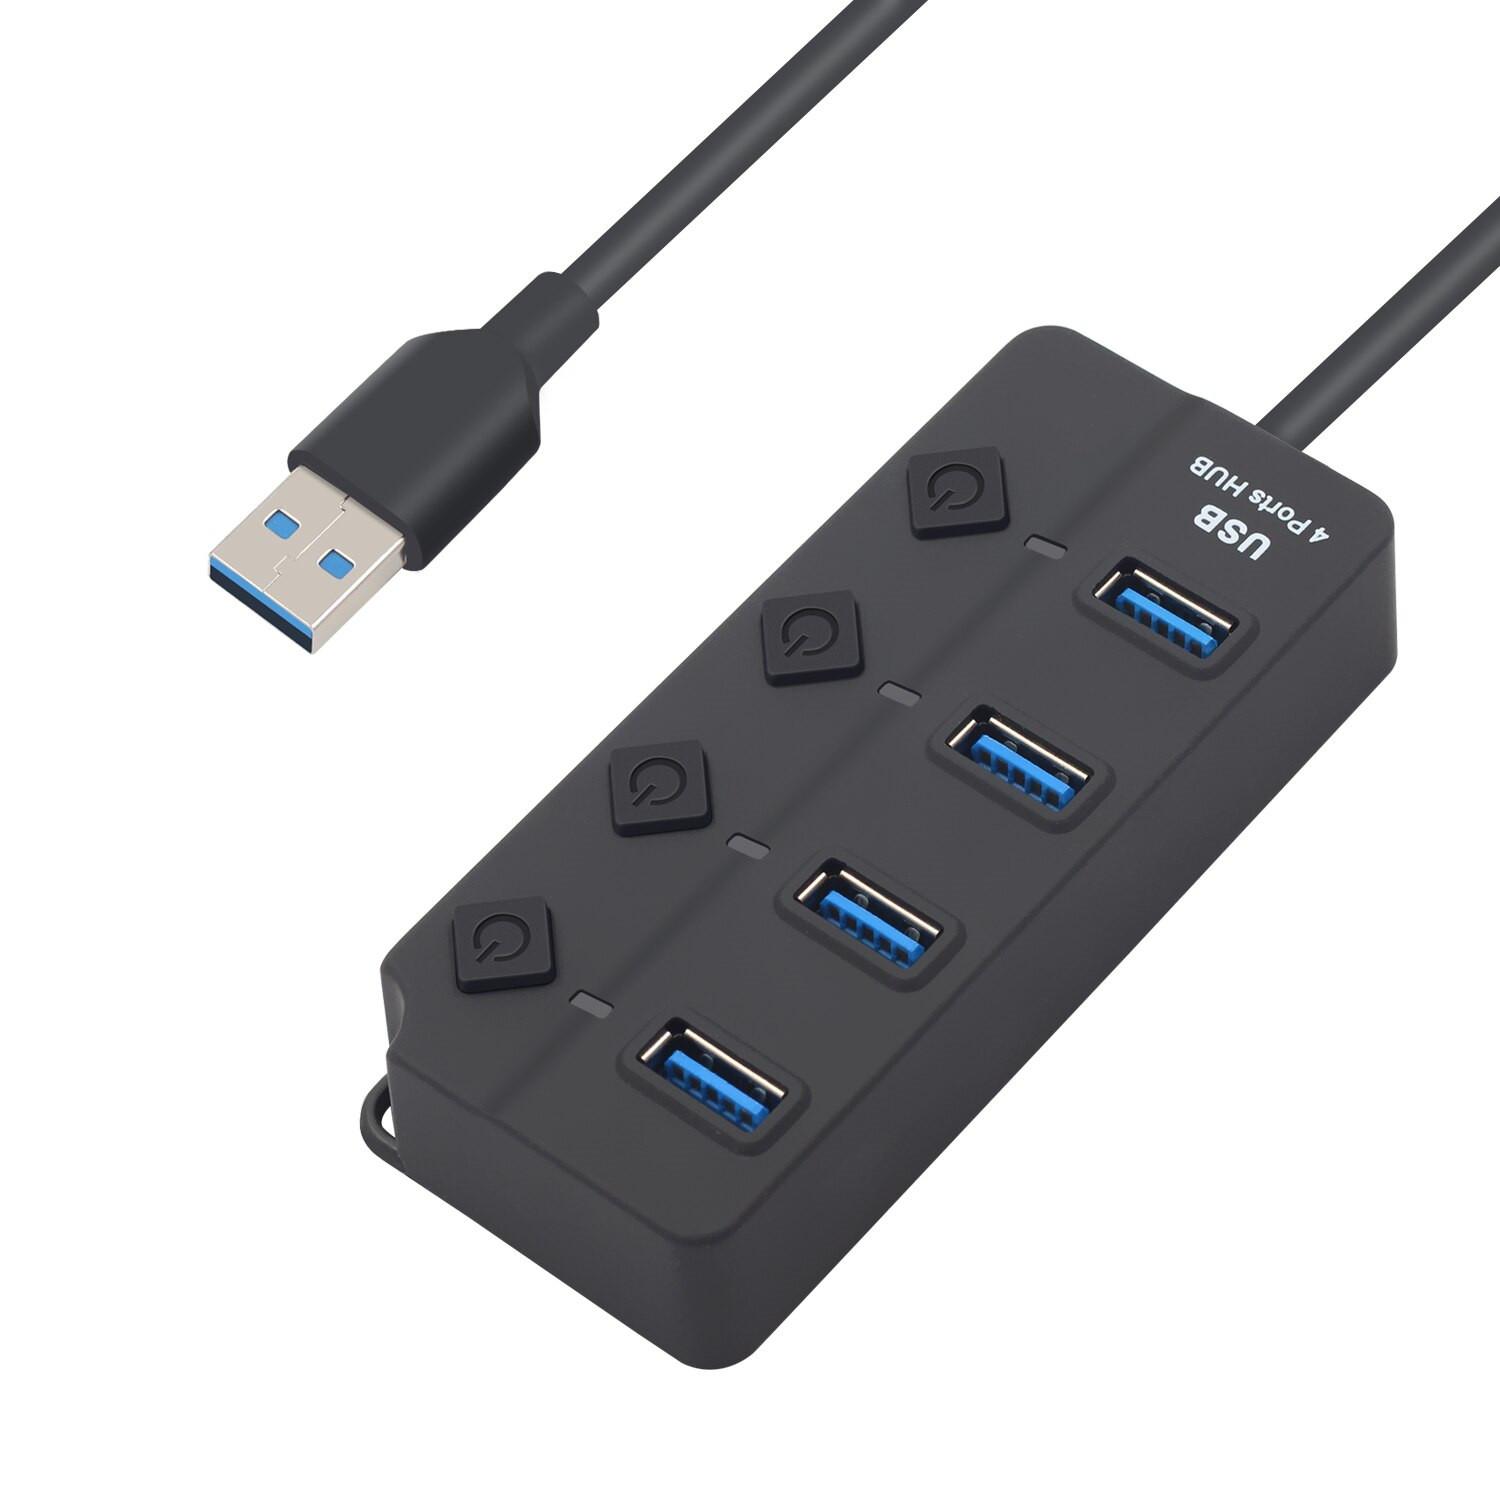 AROPANA USB 3.1 Gen 1 /USB 3.0 High Speed 5Gbps Hub for Laptop 4 Port  Portable Adapter with Individual Power ON/Off Switch and Individual Blue  LED Indicators Multi-Port - Buy AROPANA USB